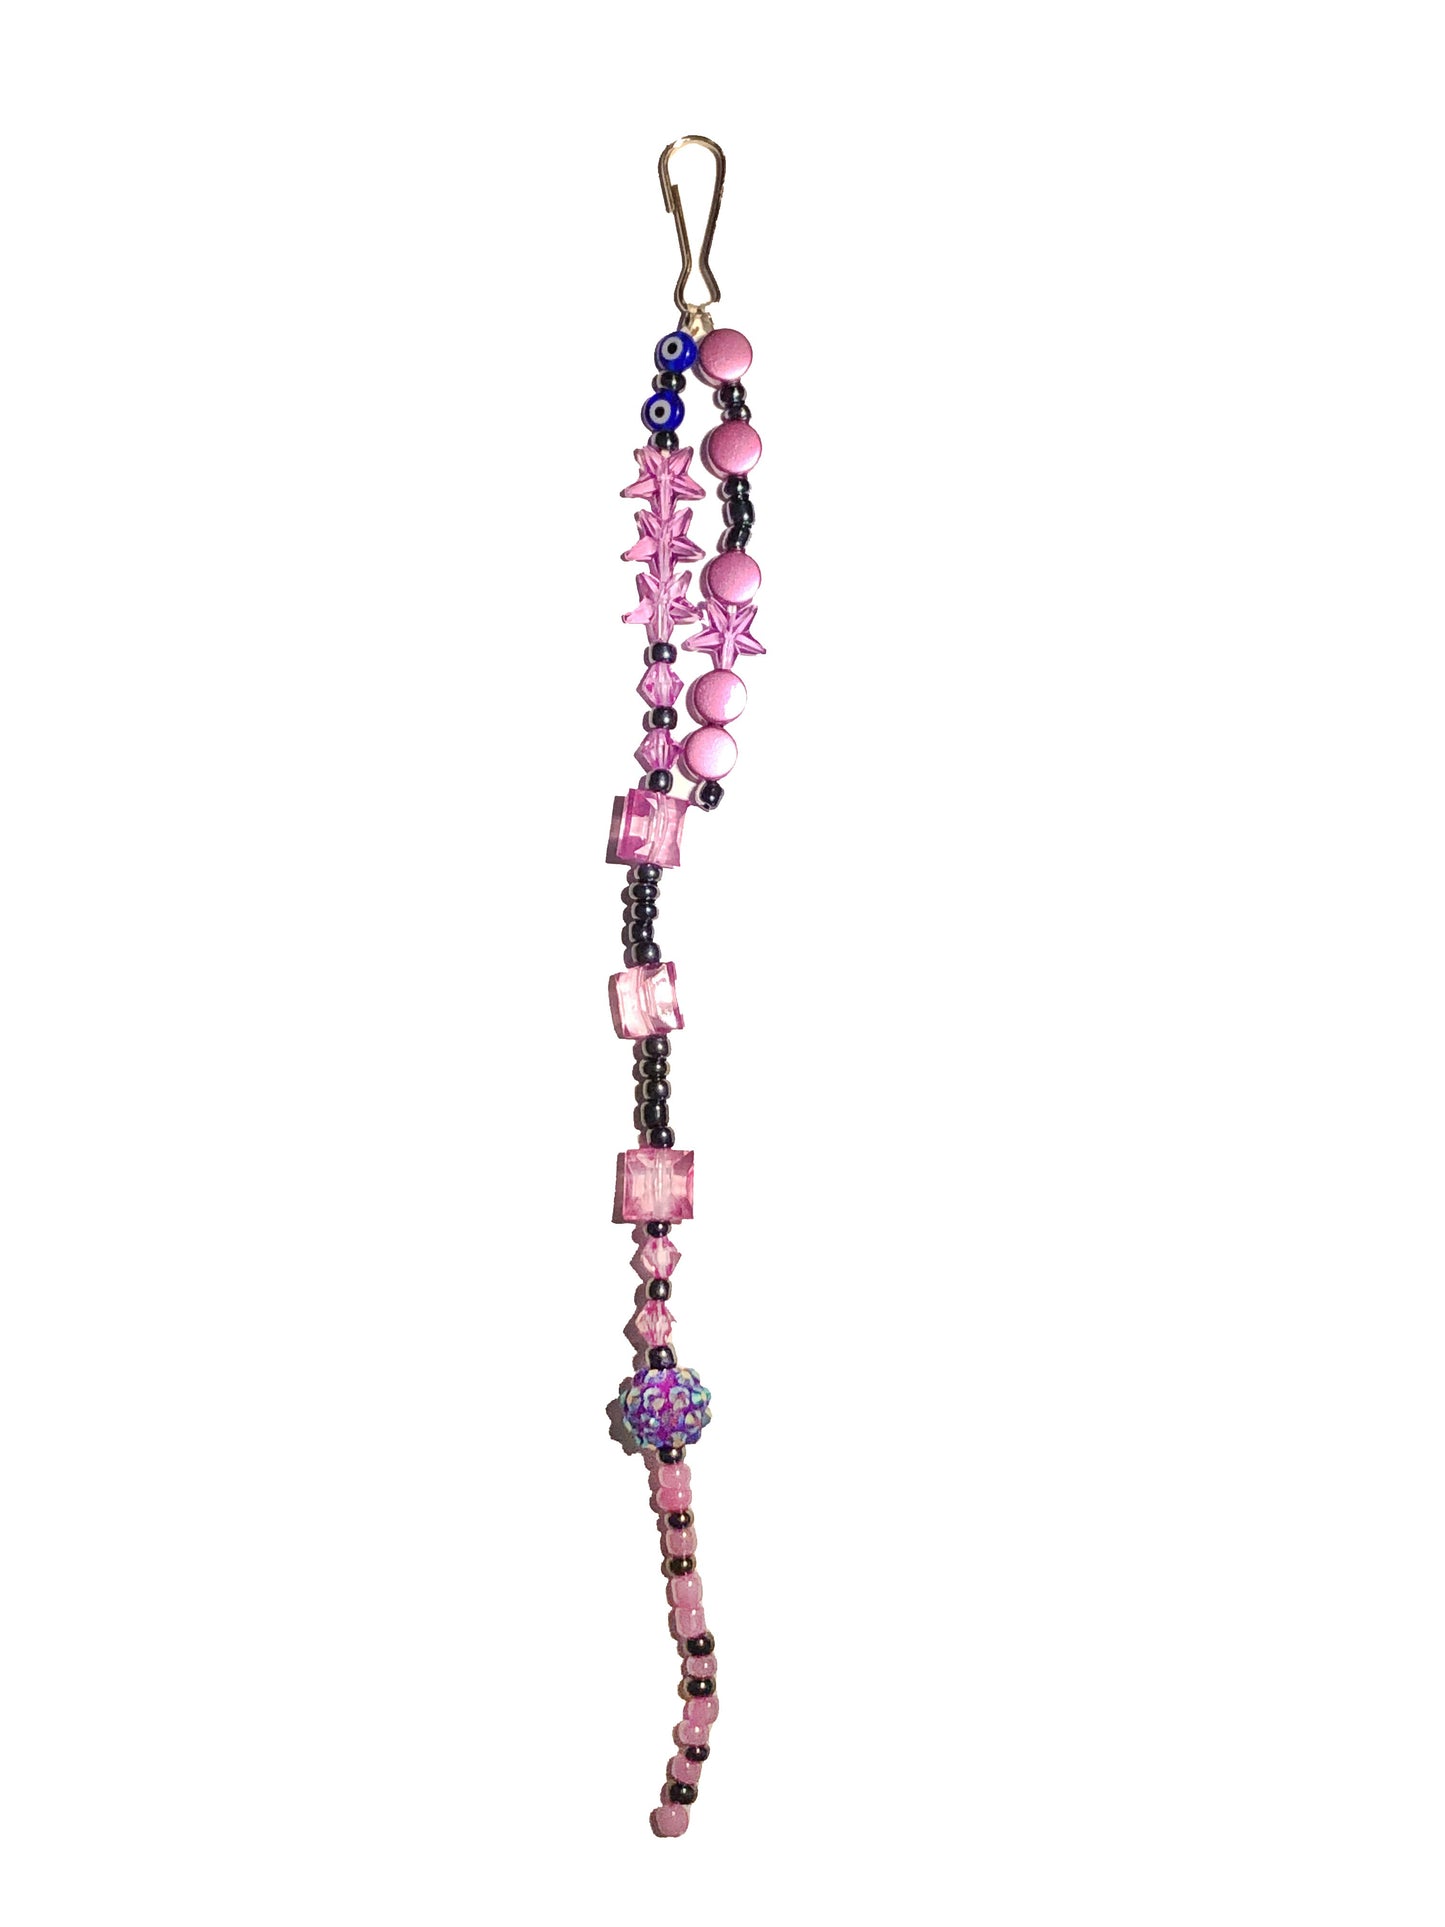 Pink and black beaded bag charm with a ball and evil eye charms.